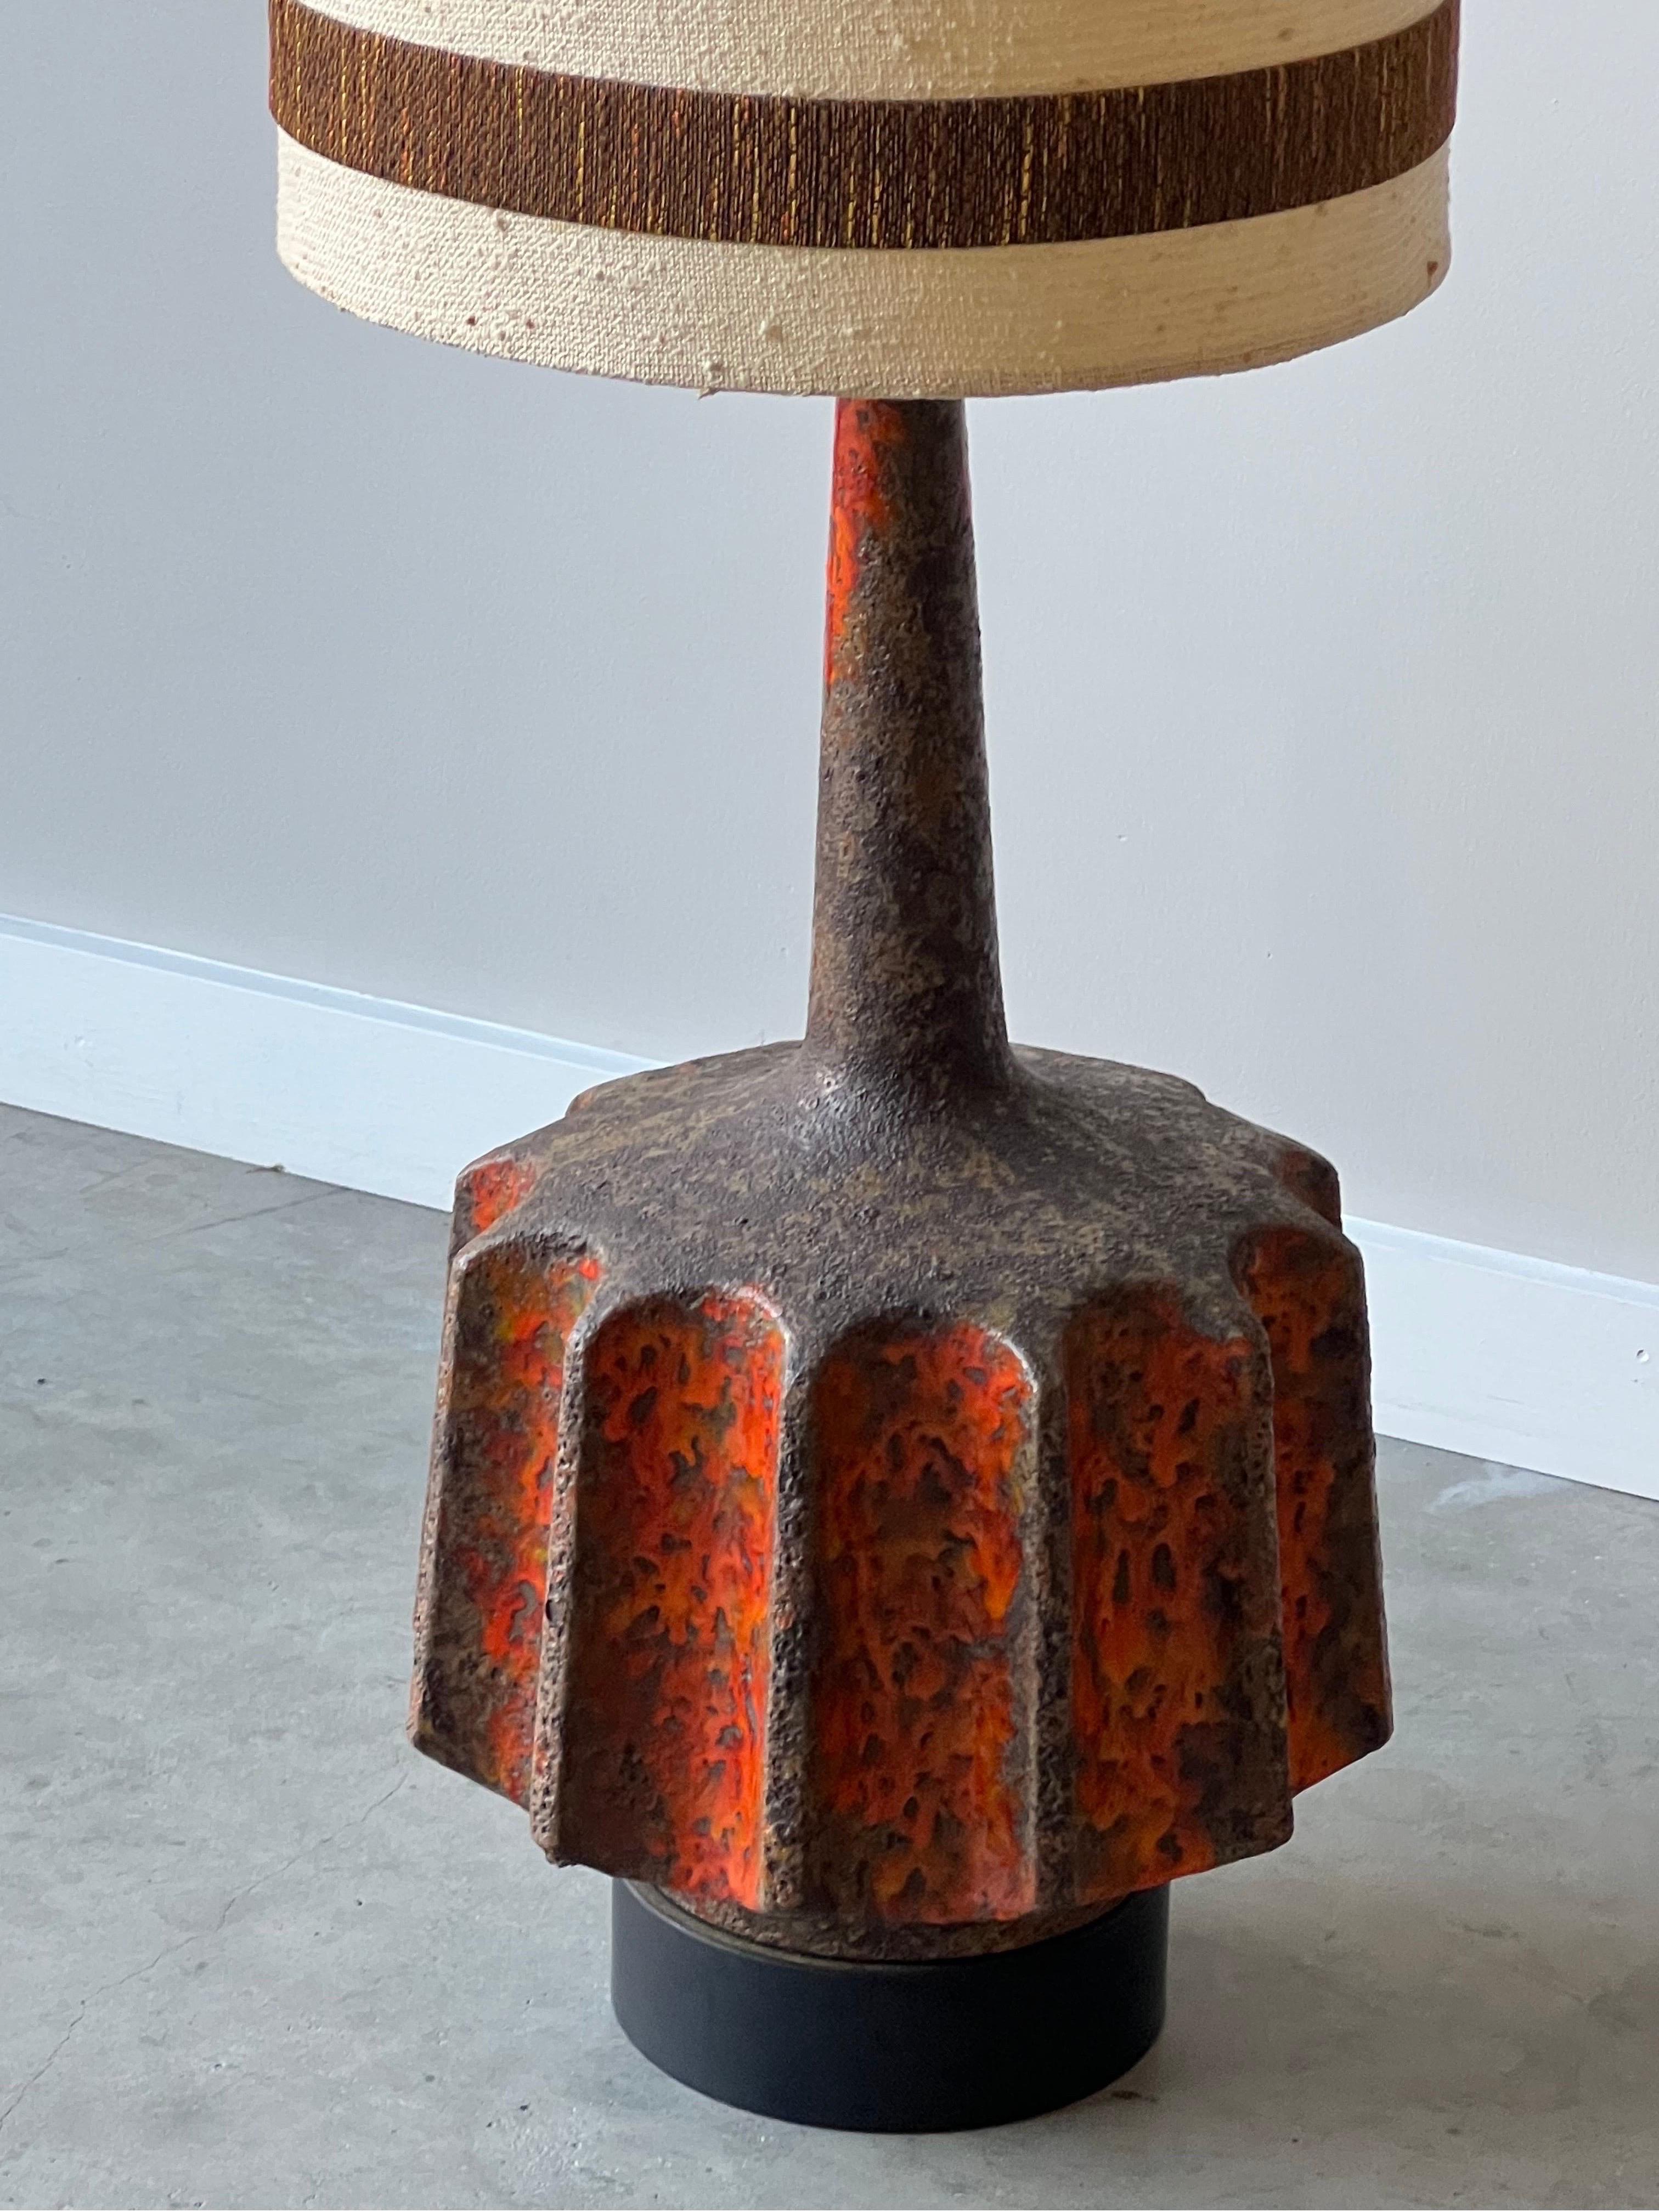 Mid-century massive brutalist ceramic lava glaze lamp, made circa 1960s. This table lamp is an absolute statement piece. Bright orange coloration, heavily textured due to the lava glaze, and large stature. Equipped with the original shade, also